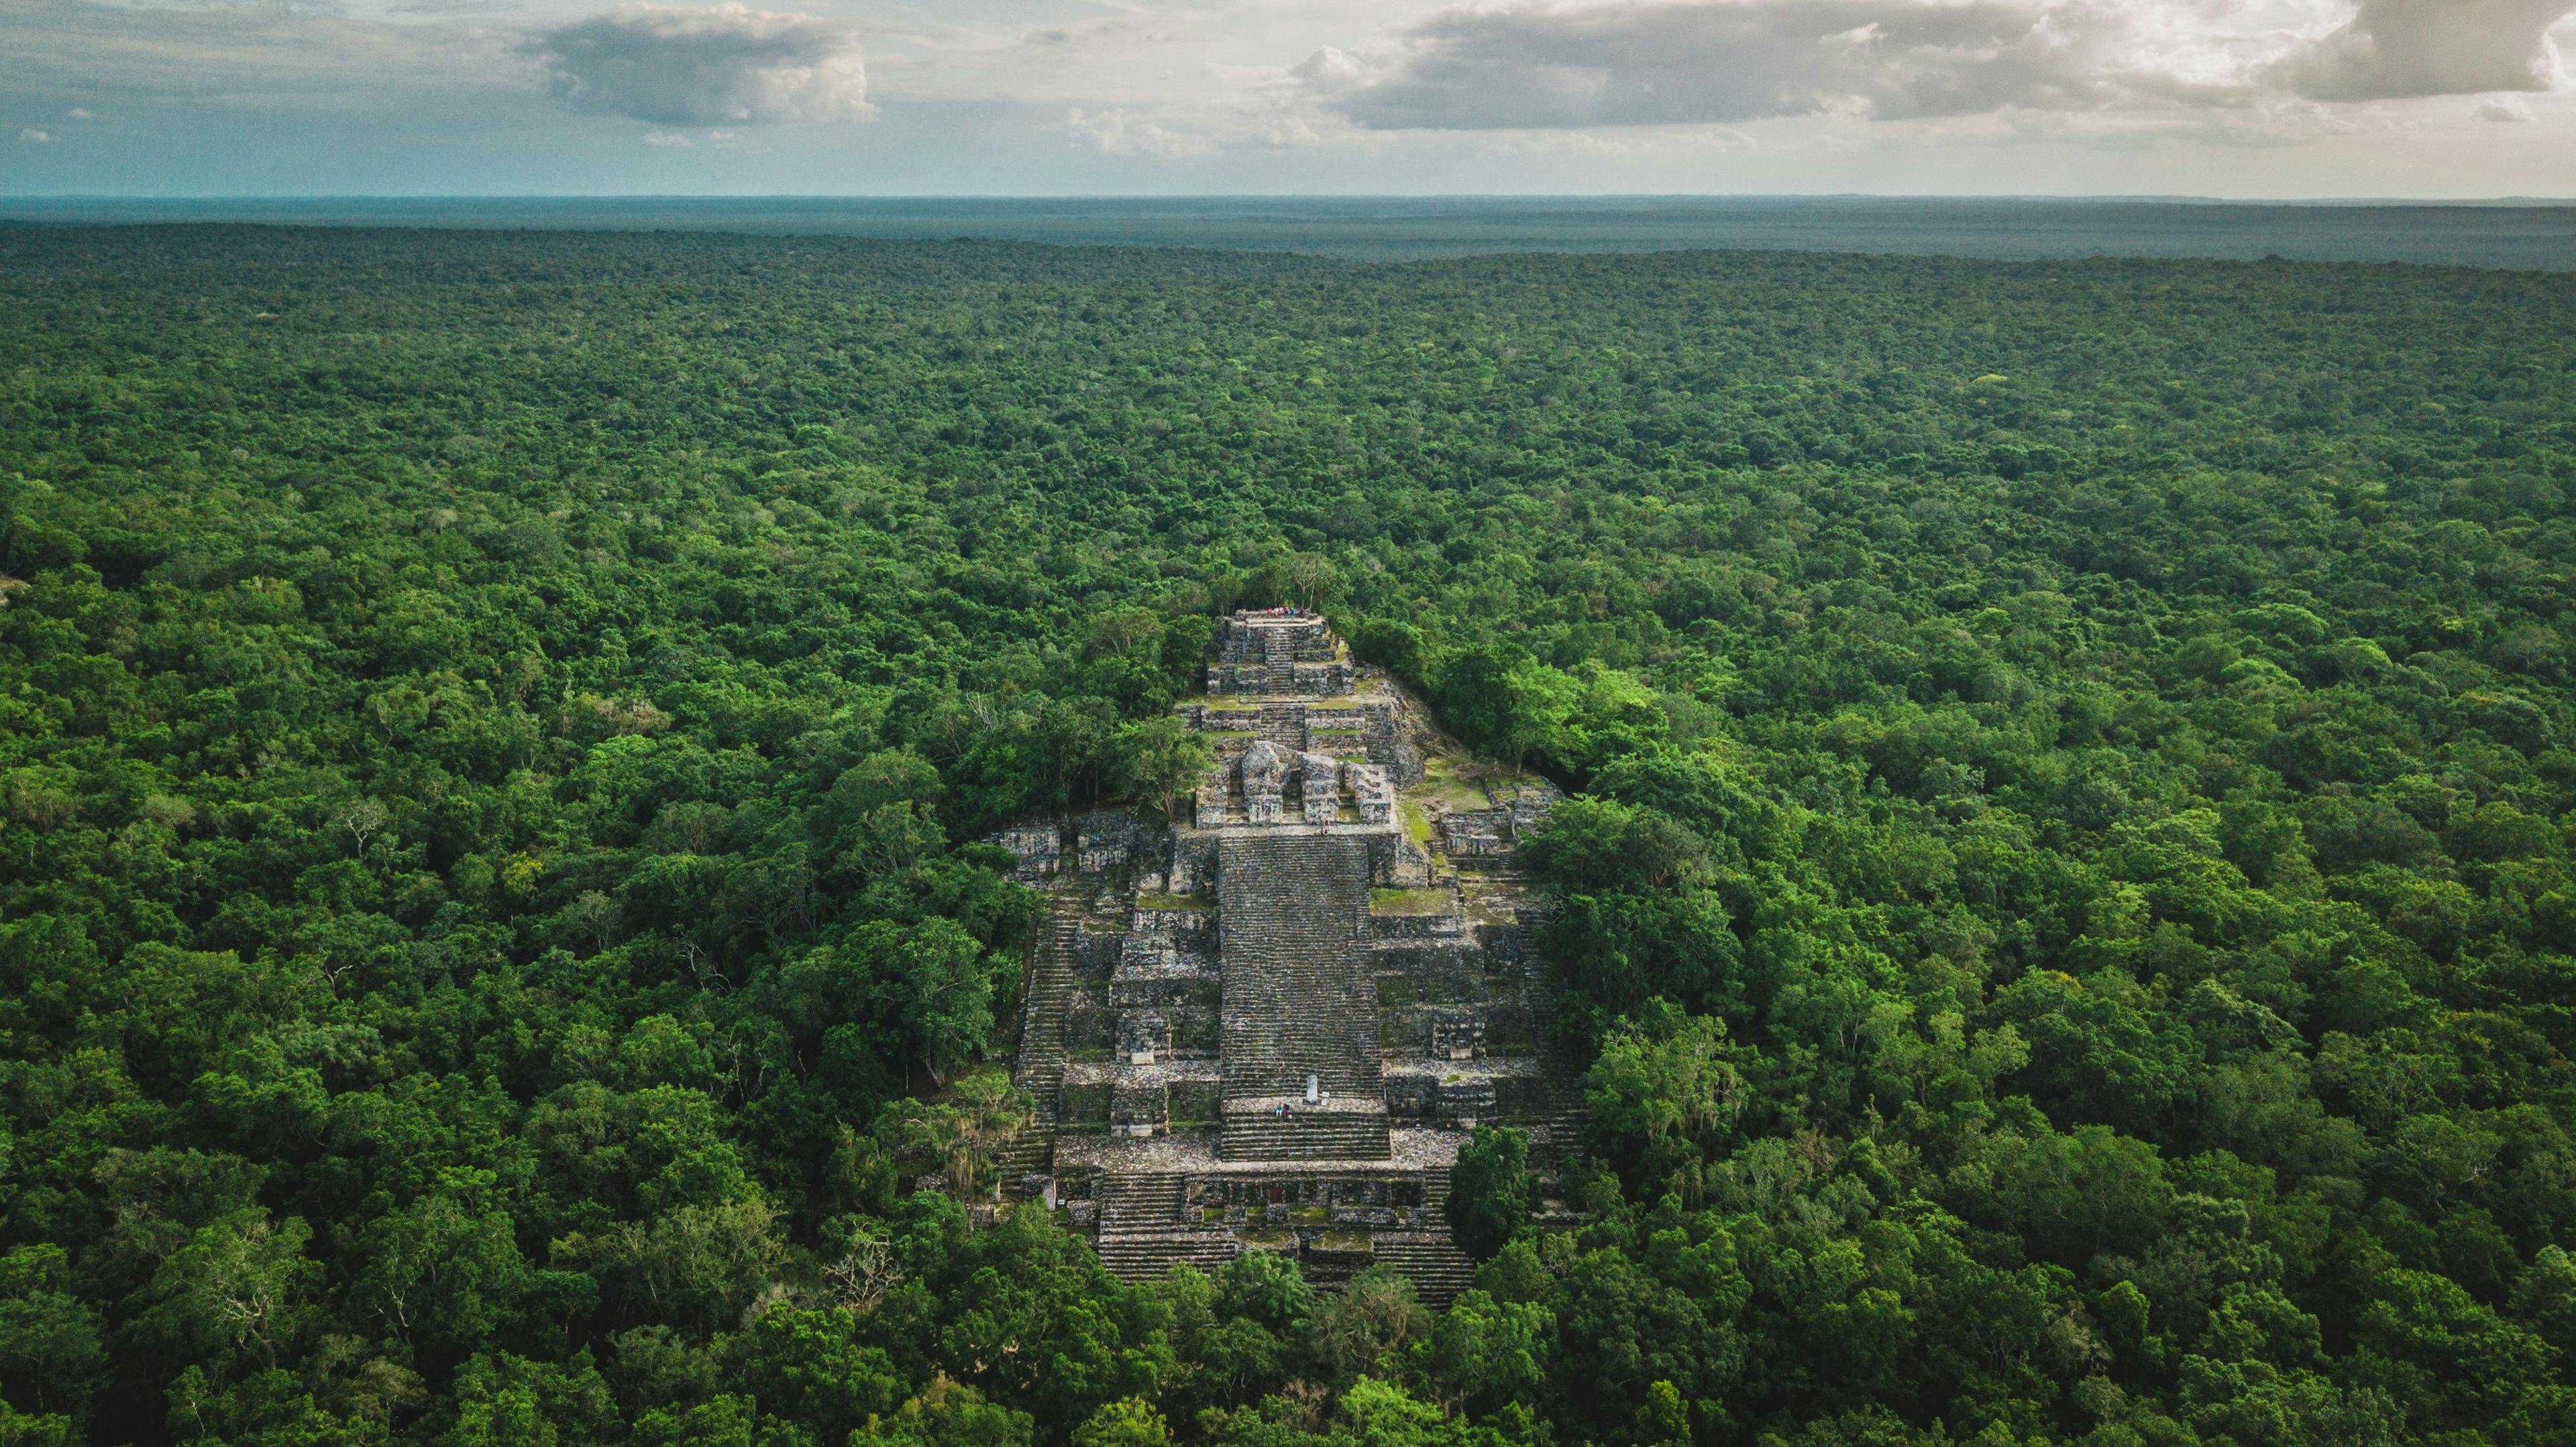 Aerial view of the pyramid, Calakmul, Campeche, Mexico. Ruins of the ancient Mayan city of Calakmul surrounded by the jungle | Image Credit: © Alfredo - stock.adobe.com